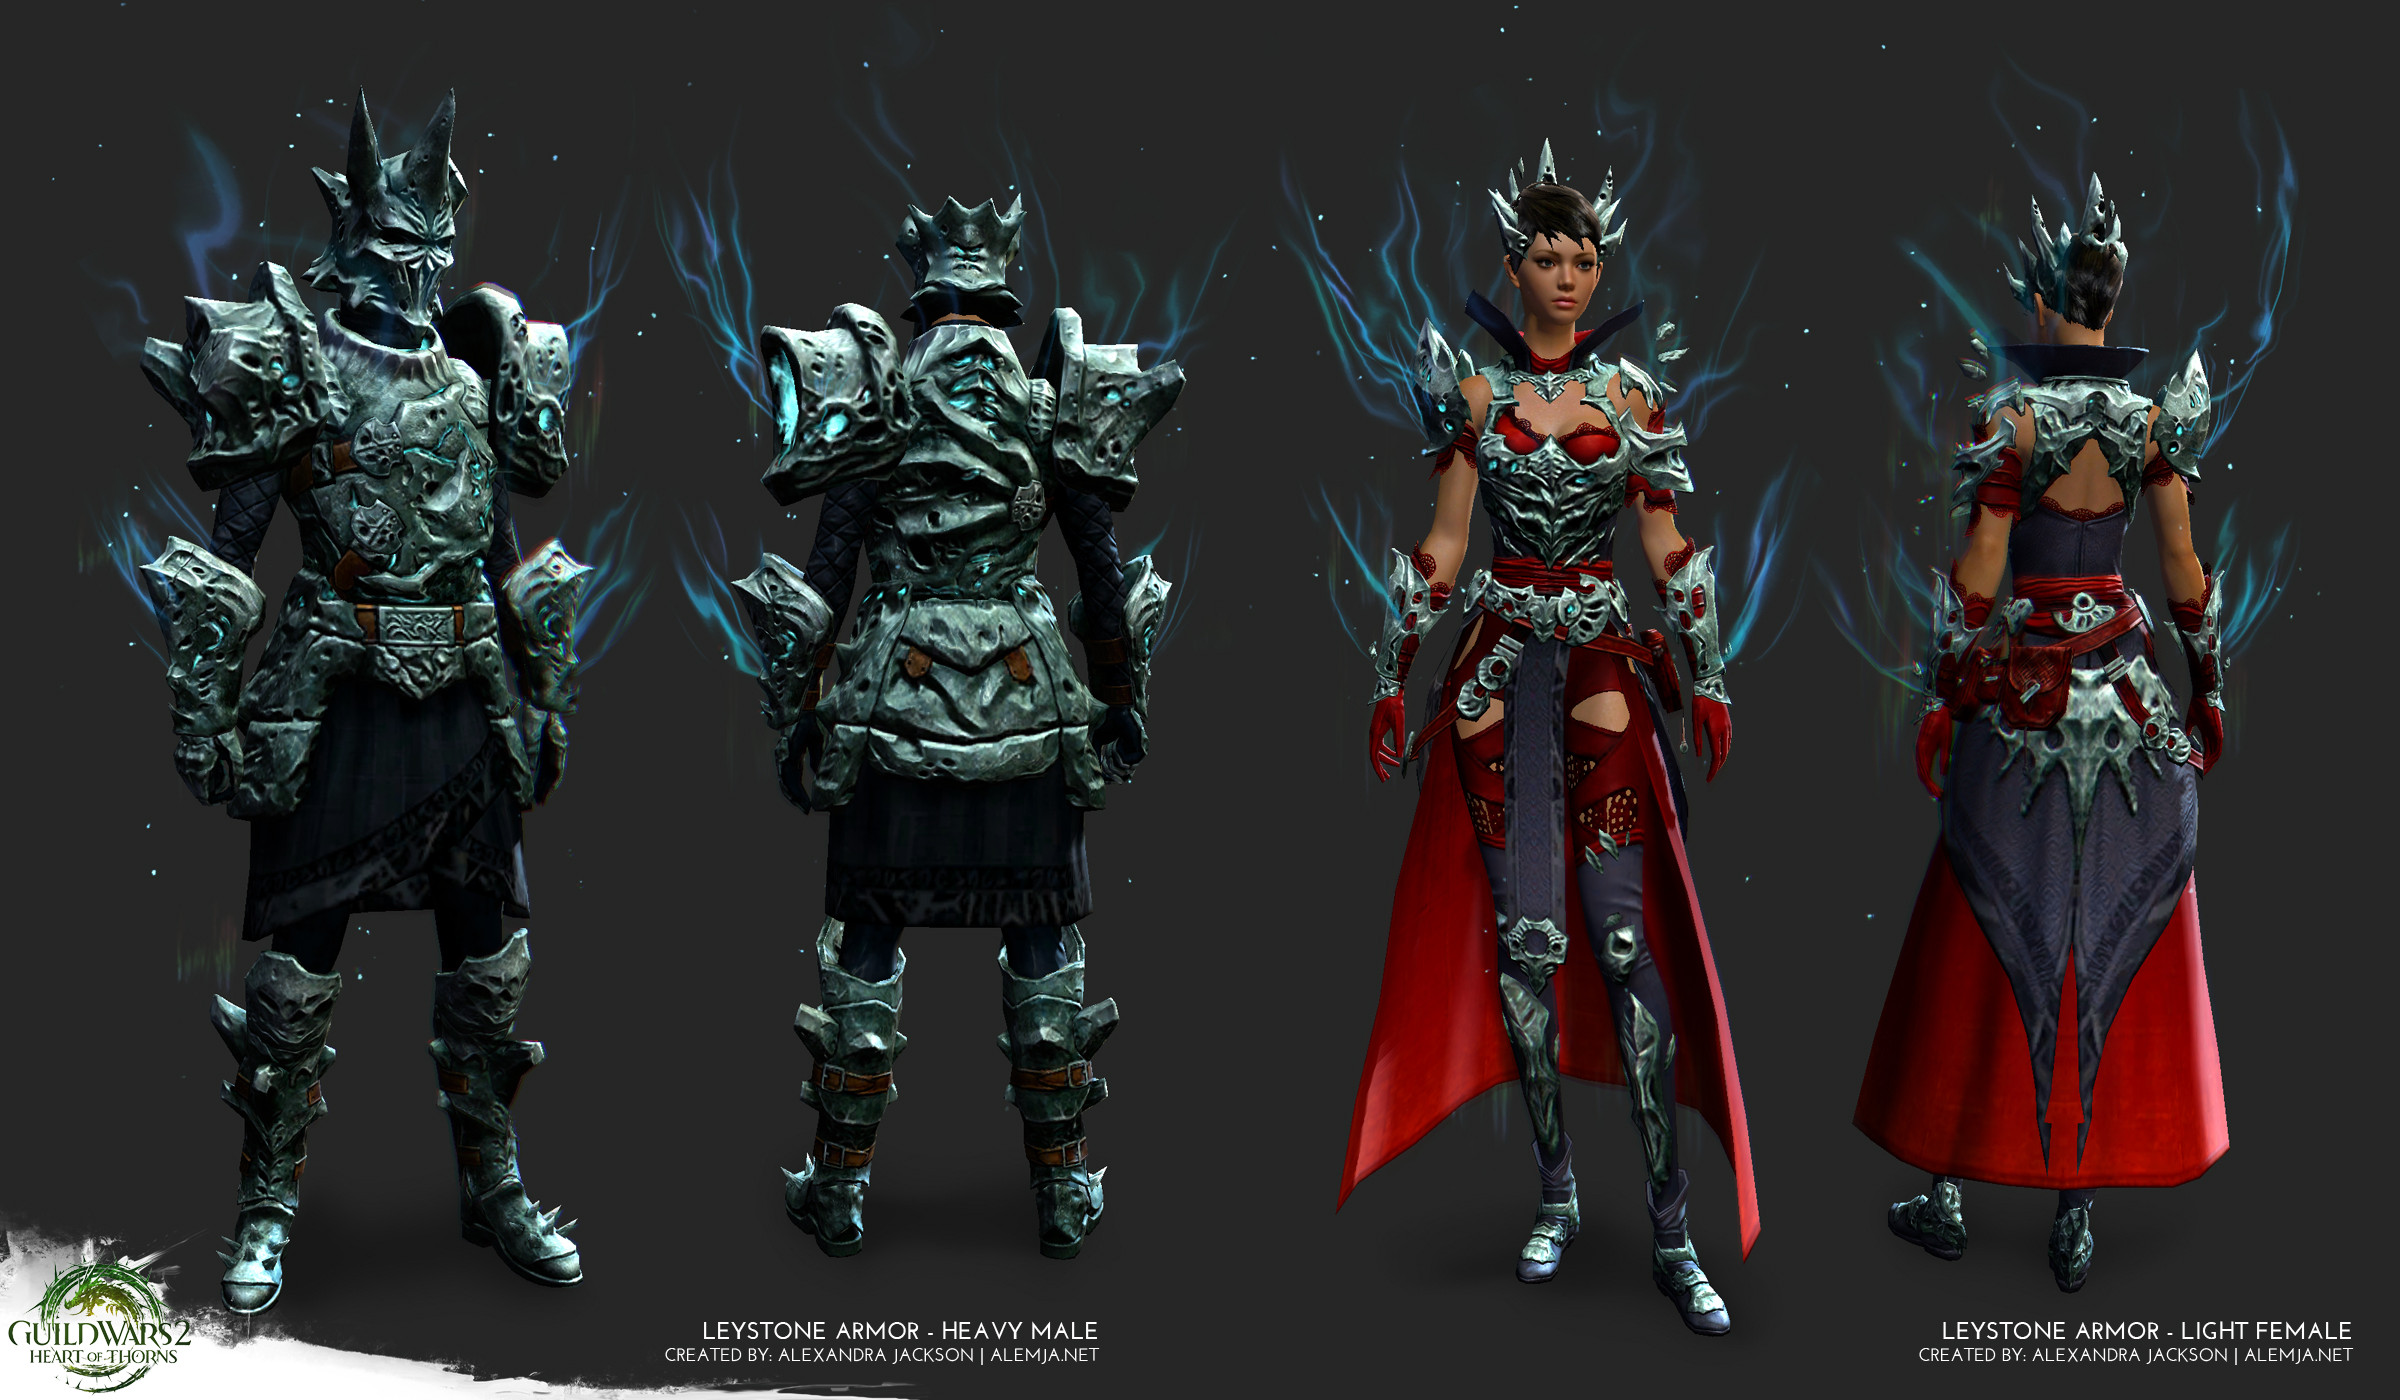 Worked on the armor game ready model and texures. This armor features VFX that were handled by the VFX team. This set was for Guild Wars 2 Heart of Thorns